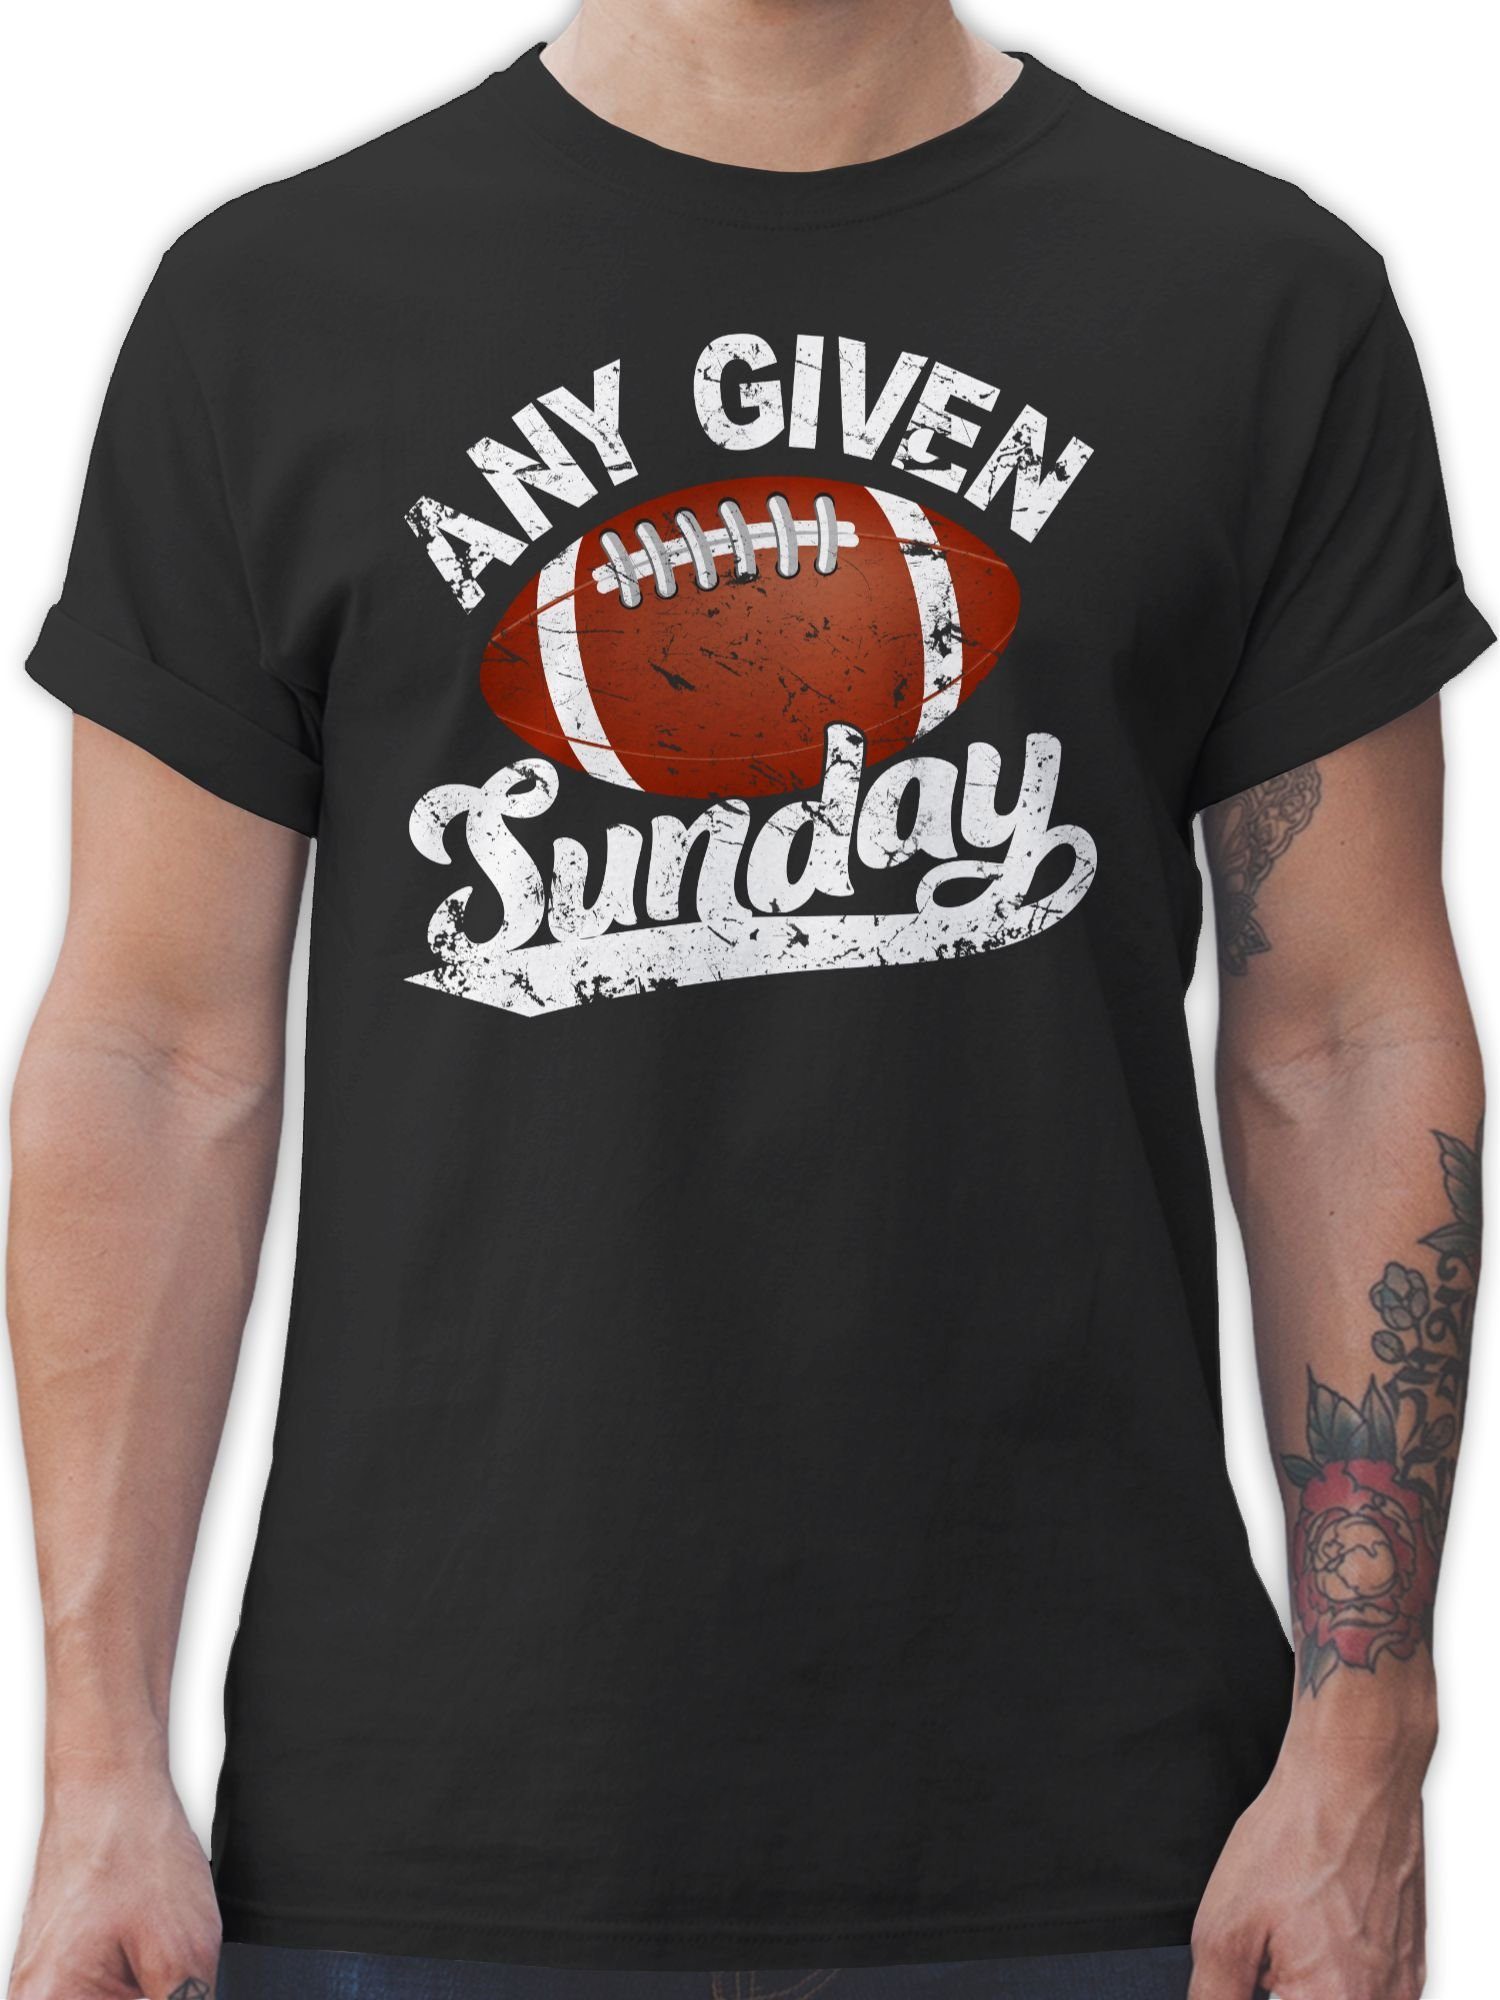 Shirtracer T-Shirt Any given Sunday mit Football weiß American Football NFL 01 Schwarz